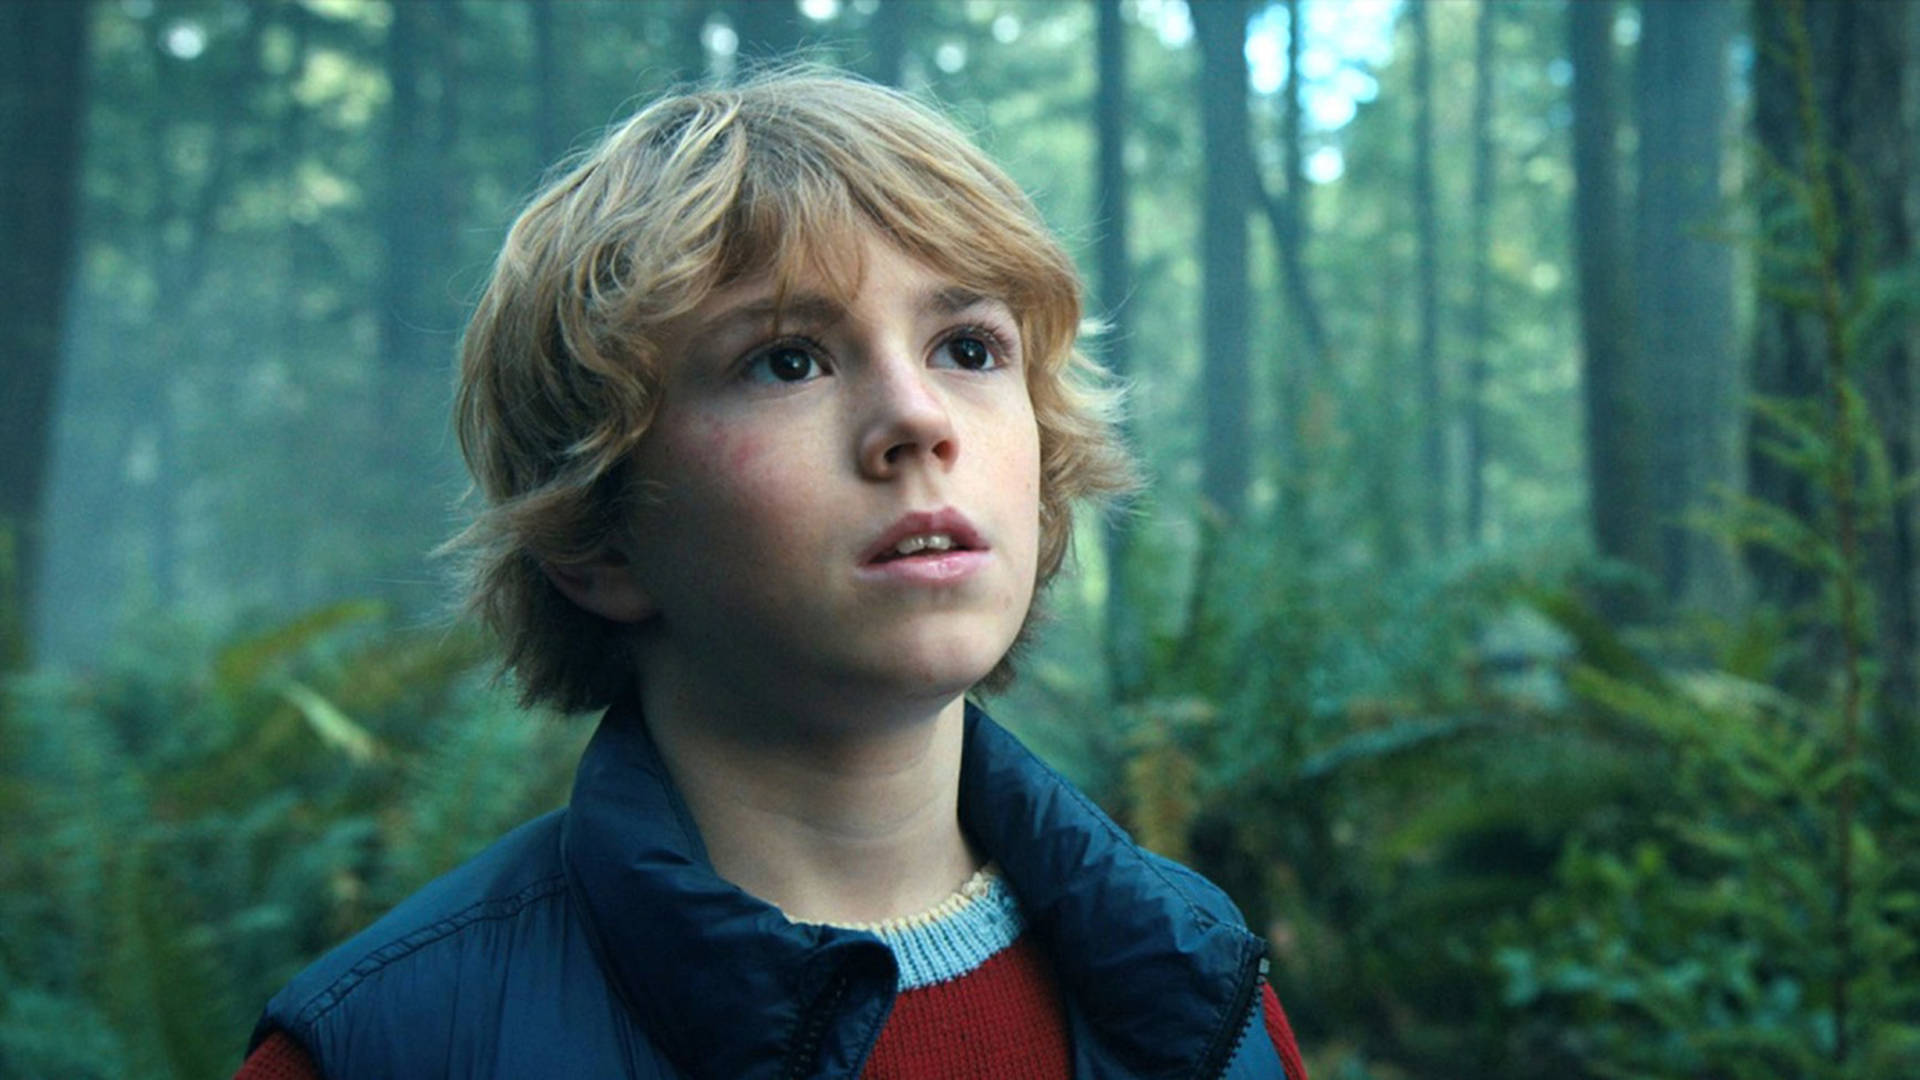 Young Adam From The Adam Project Movie. Background